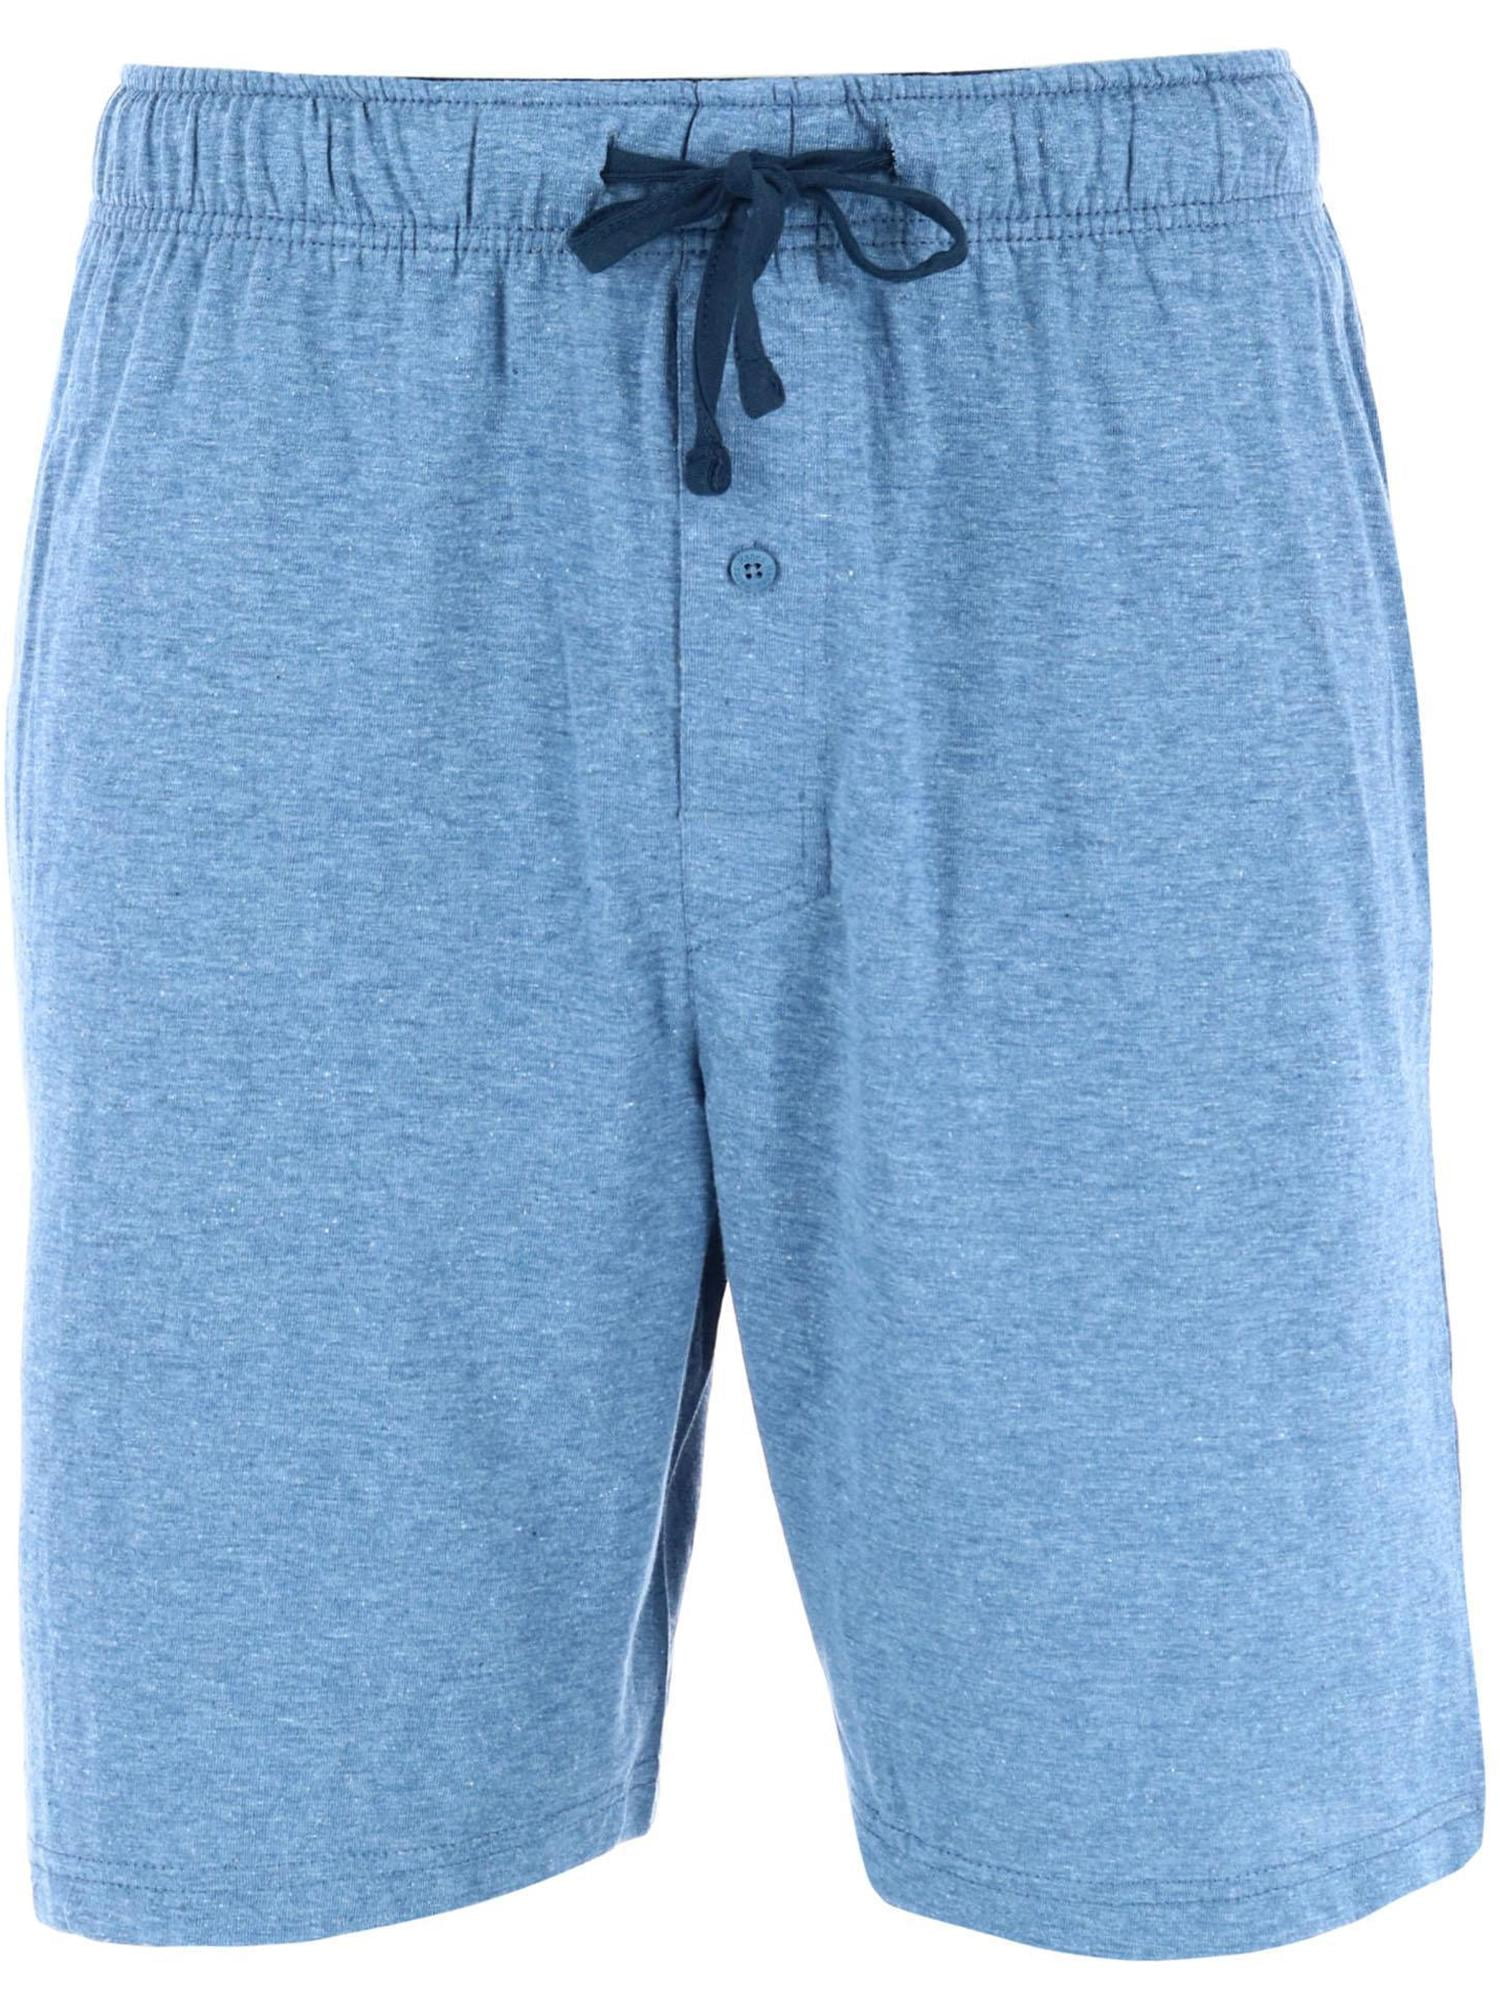 Hanes Tag Free Knit Pajama Lounge Short with Side Pockets (Men ...